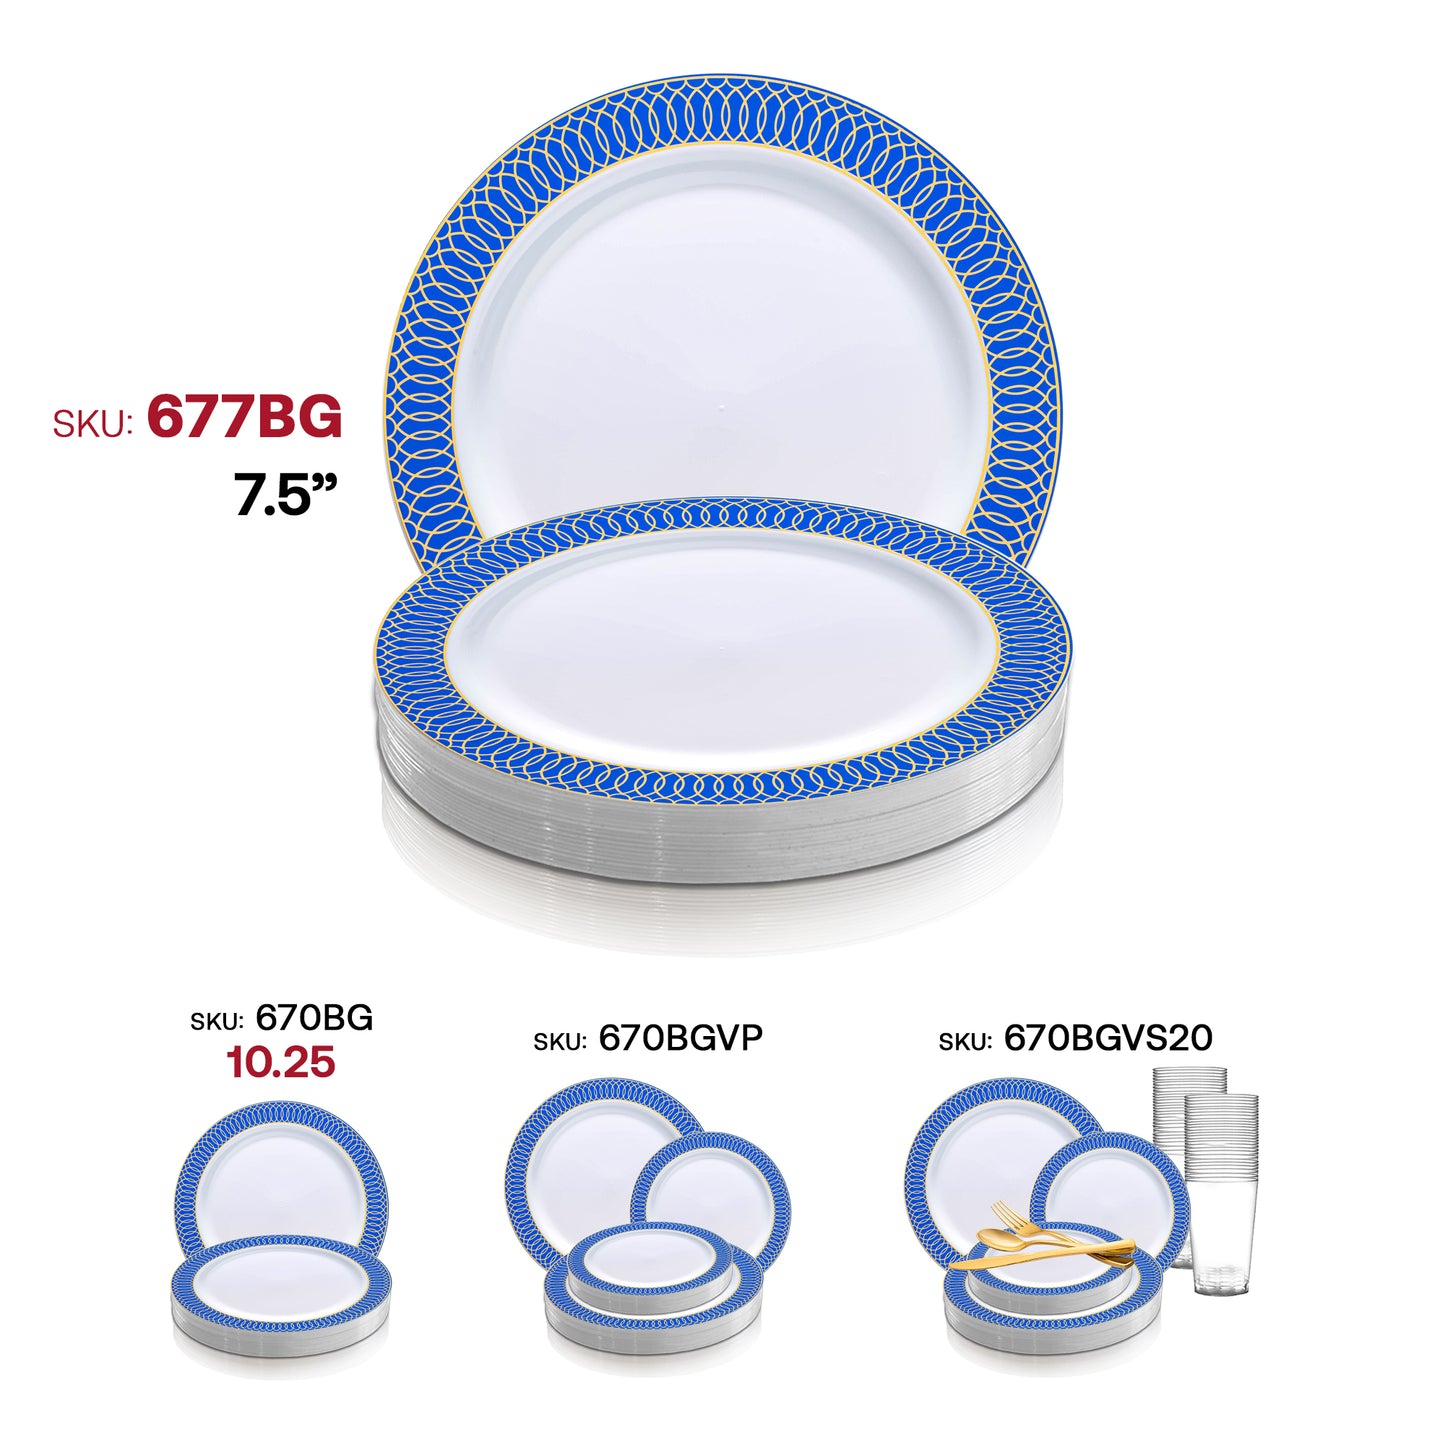 White with Gold Spiral on Blue Rim Plastic Appetizer/Salad Plates (7.5") SKU | The Kaya Collection